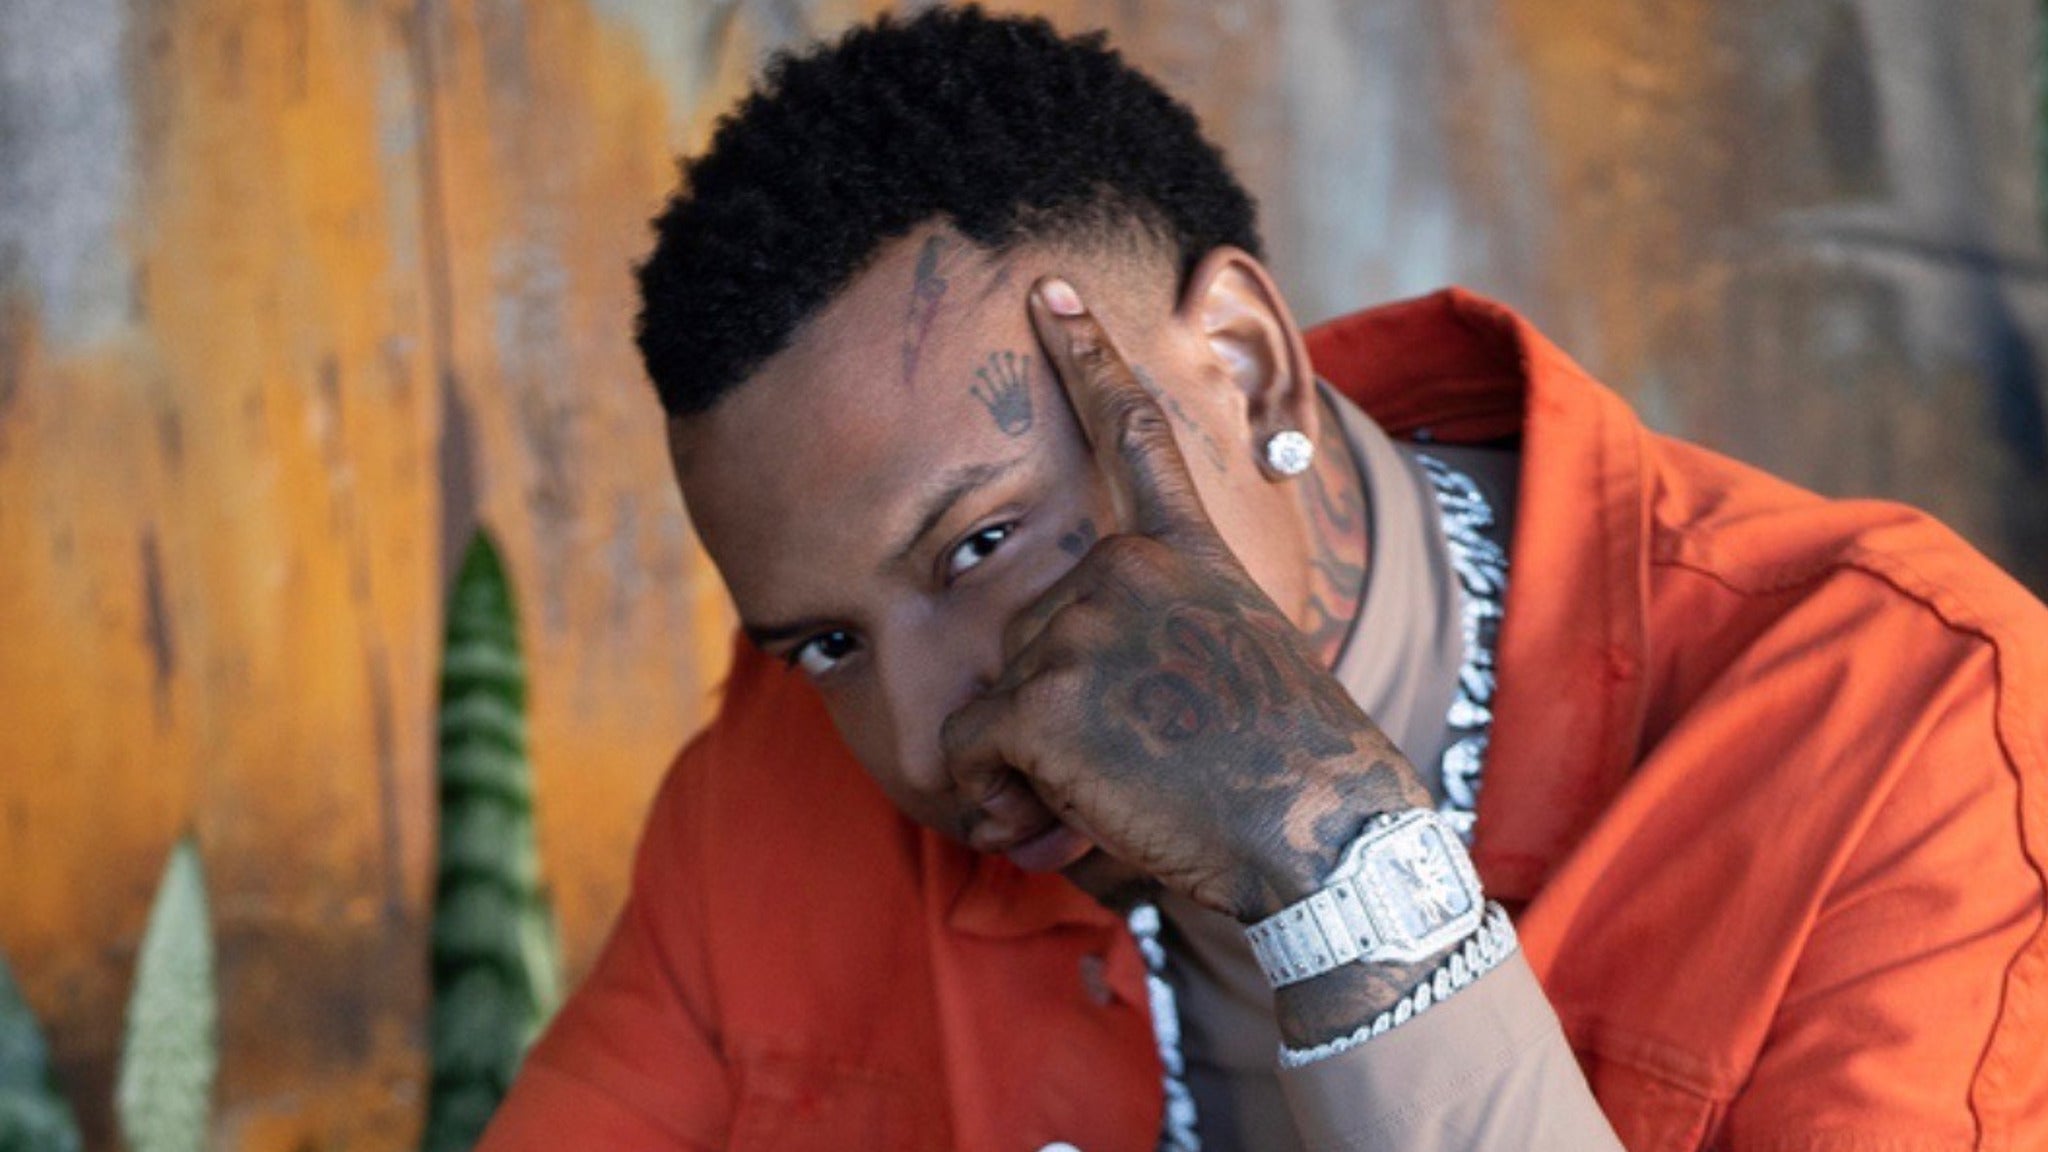 Moneybagg Yo ‘A Gangsta’s Pain’ First Week Sales Projections